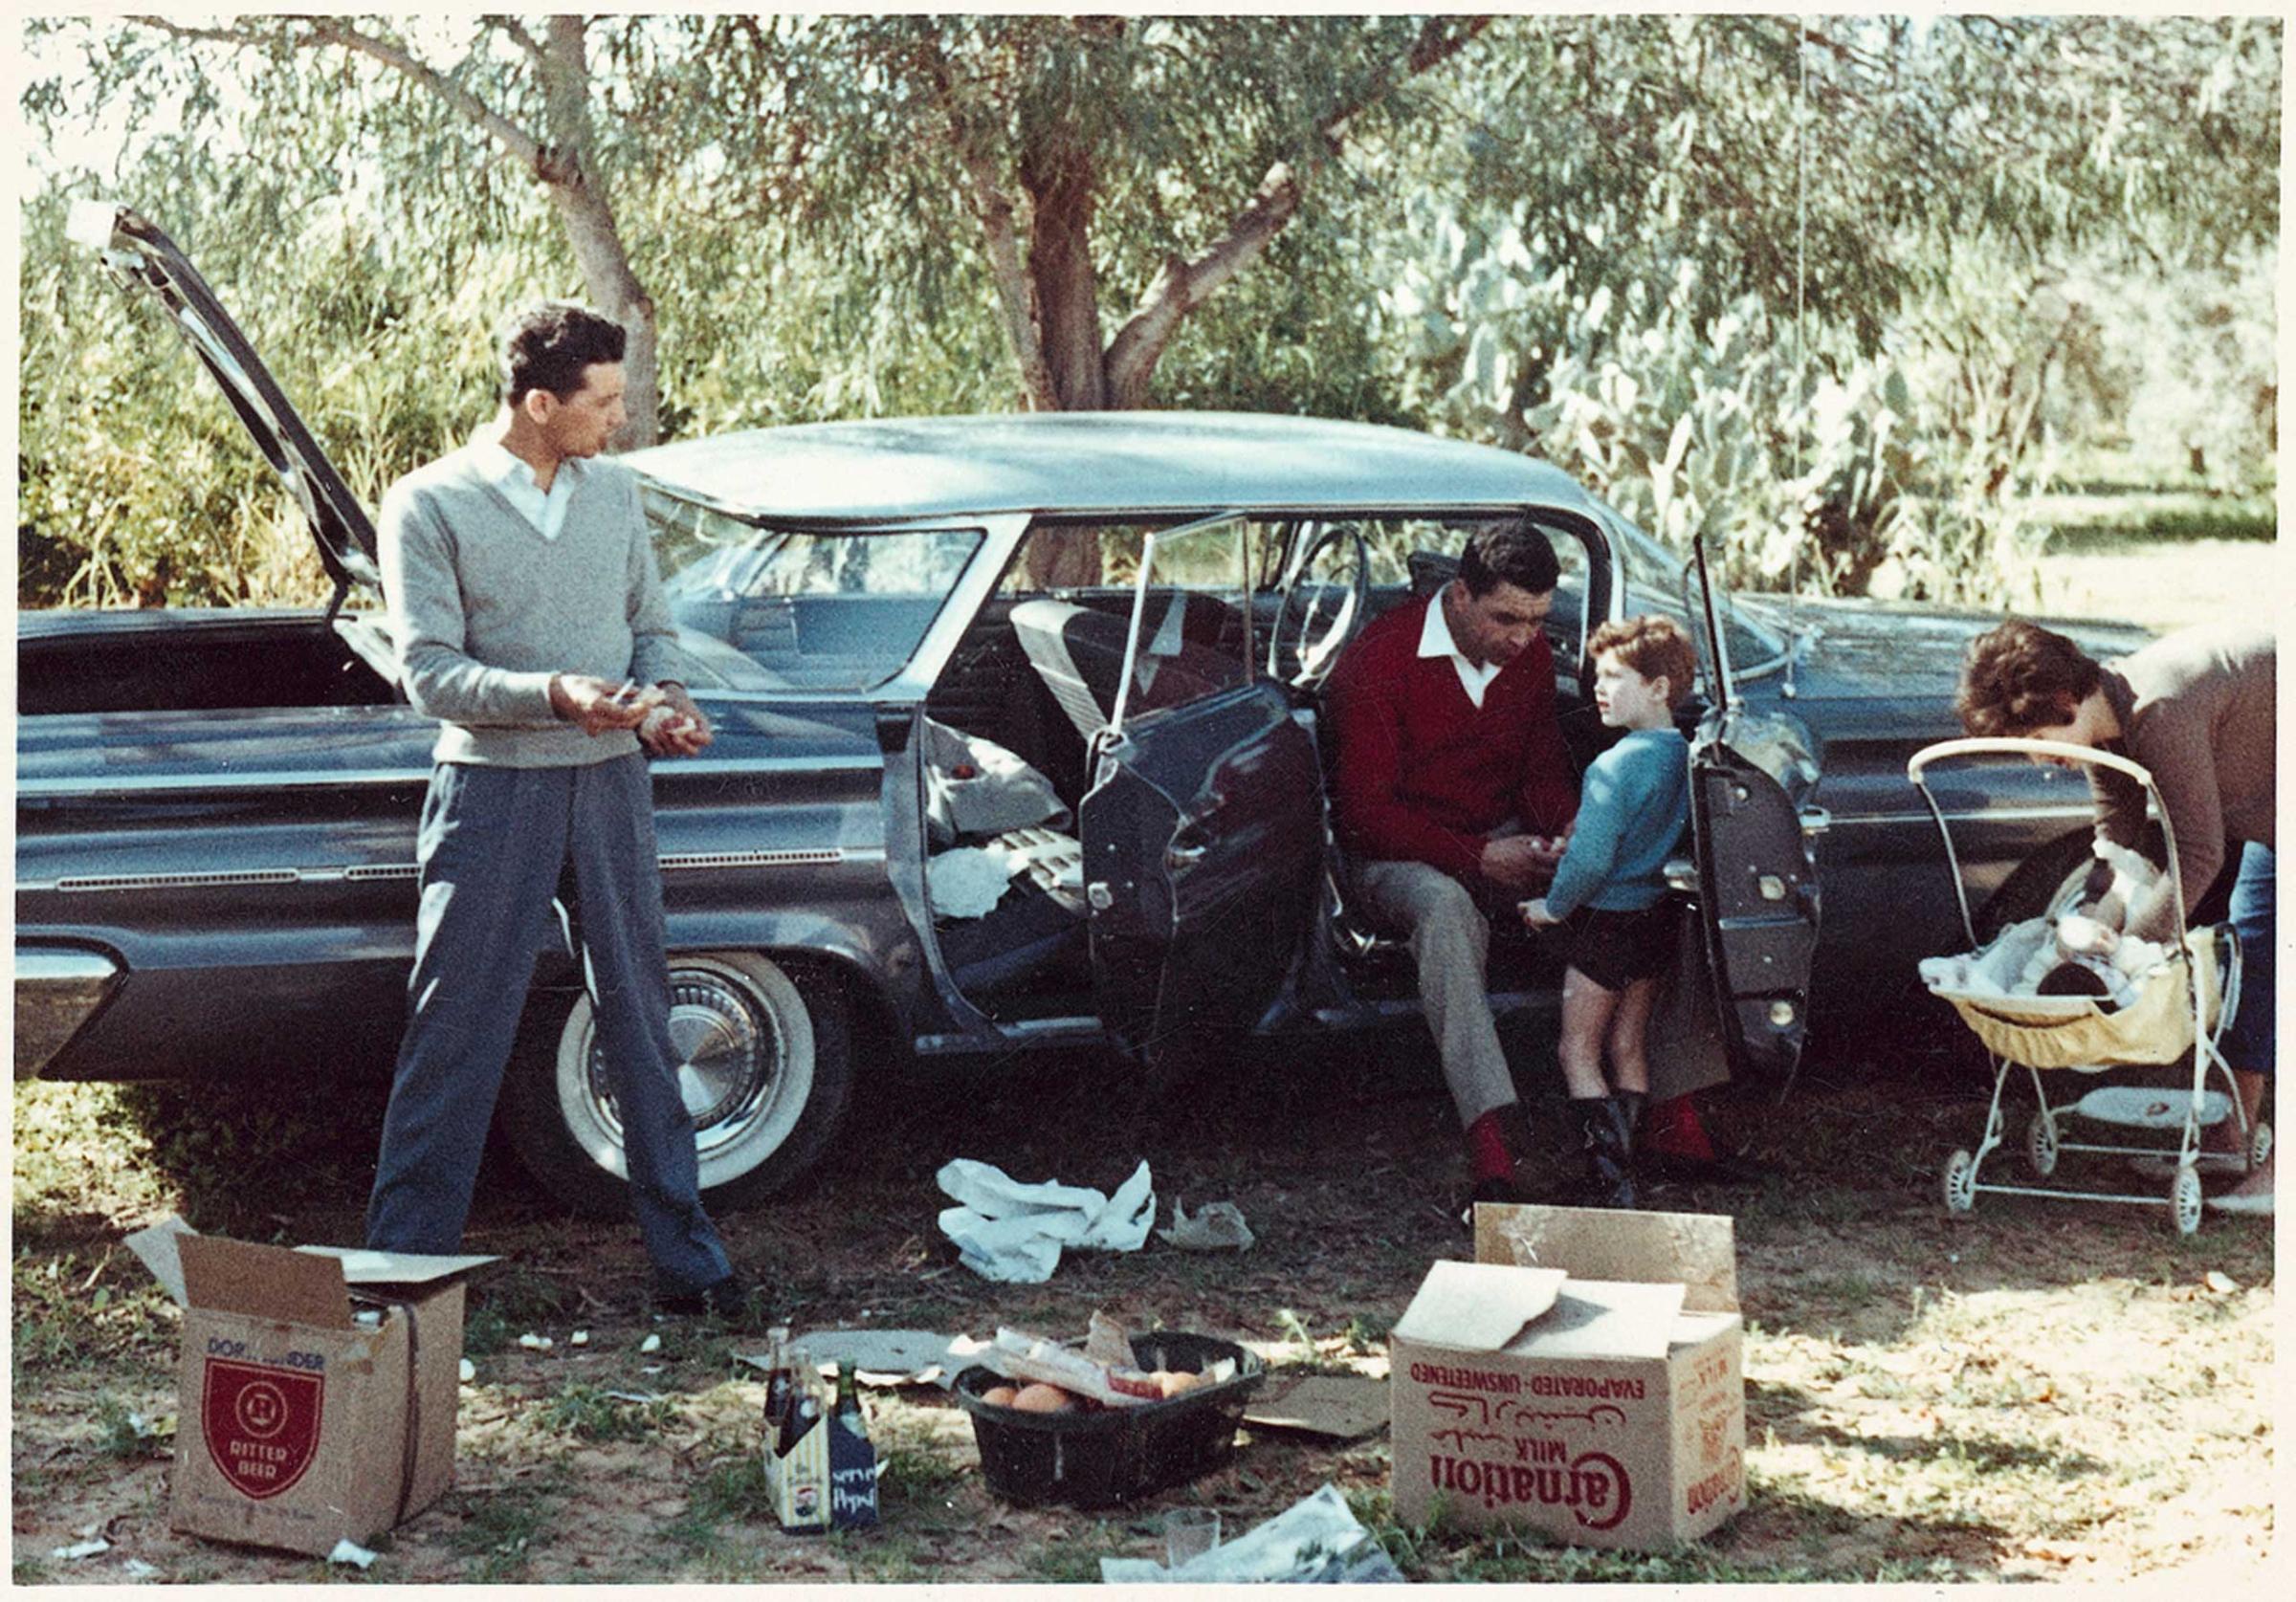 A picnic in Mohamed Nga's car, which he had purchased on a U.S. military base in Tripoli